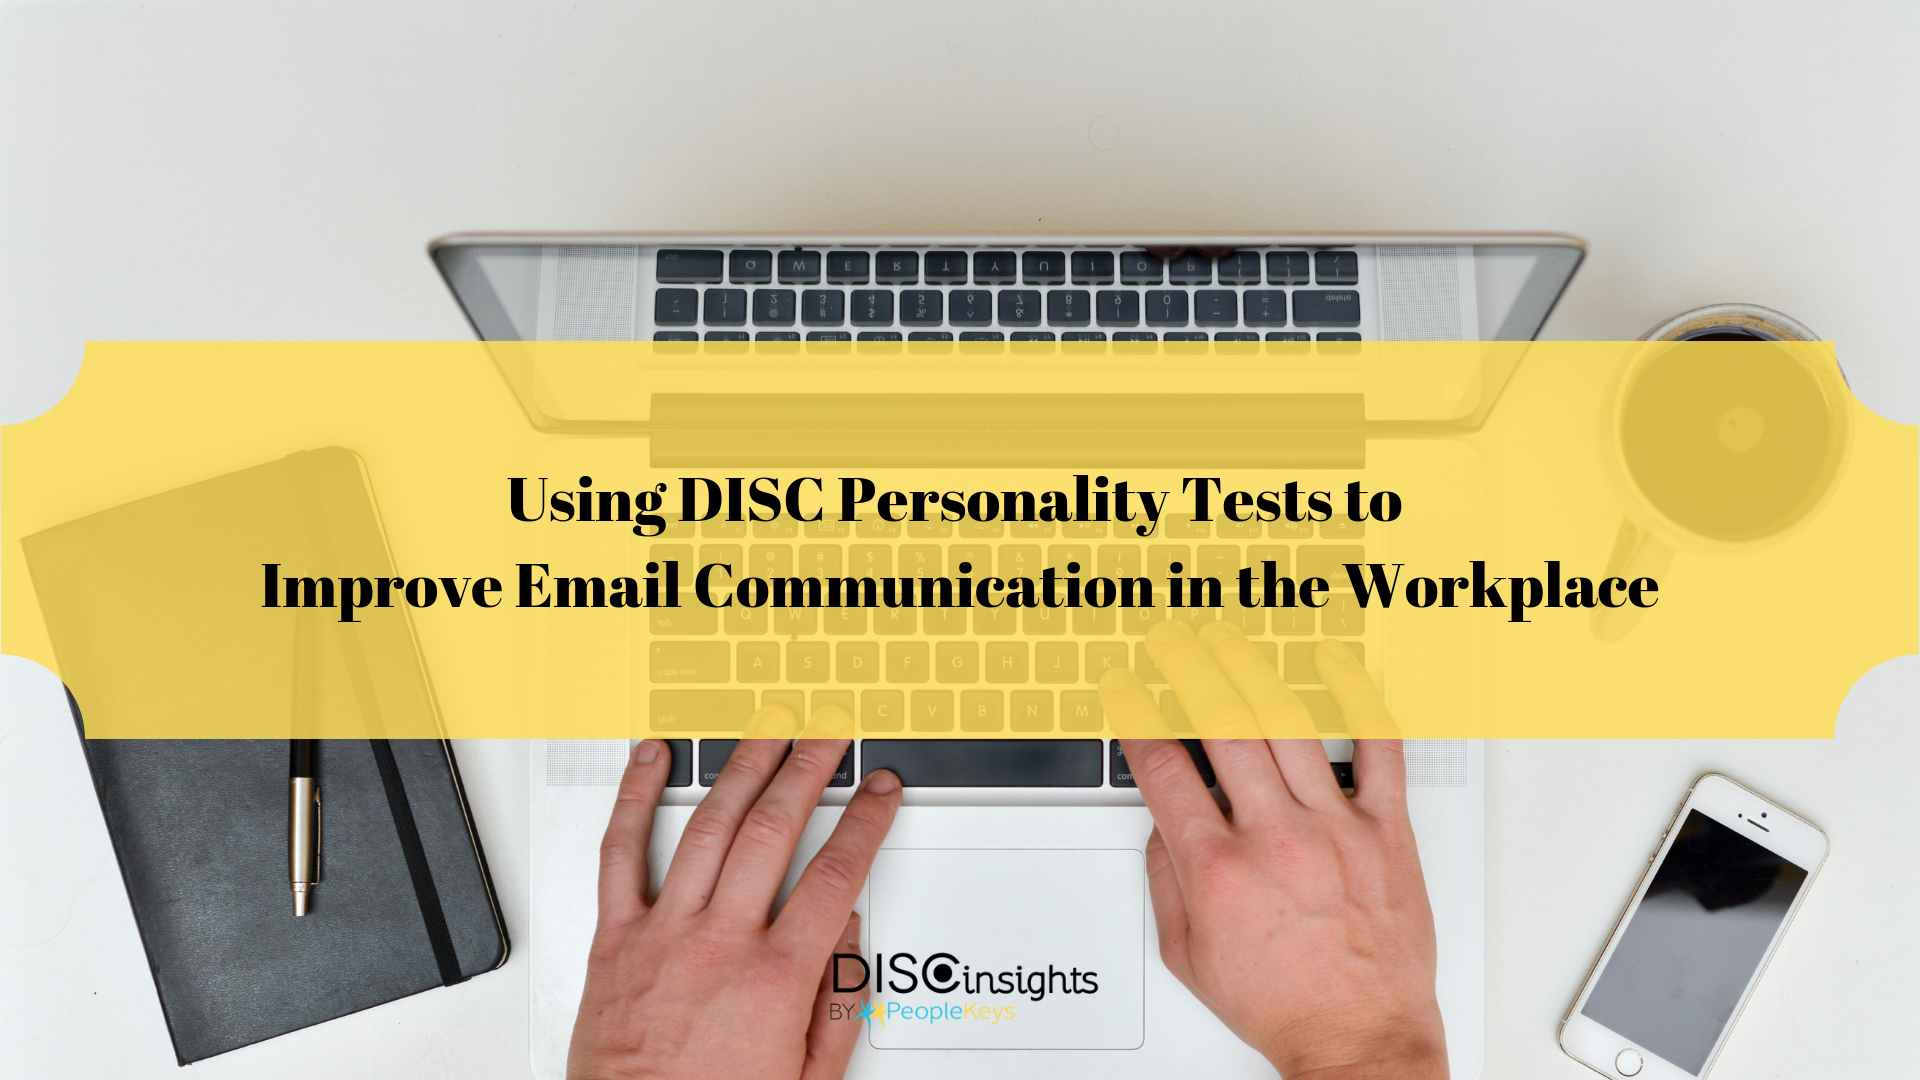 Using DISC Personality Tests to Improve Email Communication in the Workplace